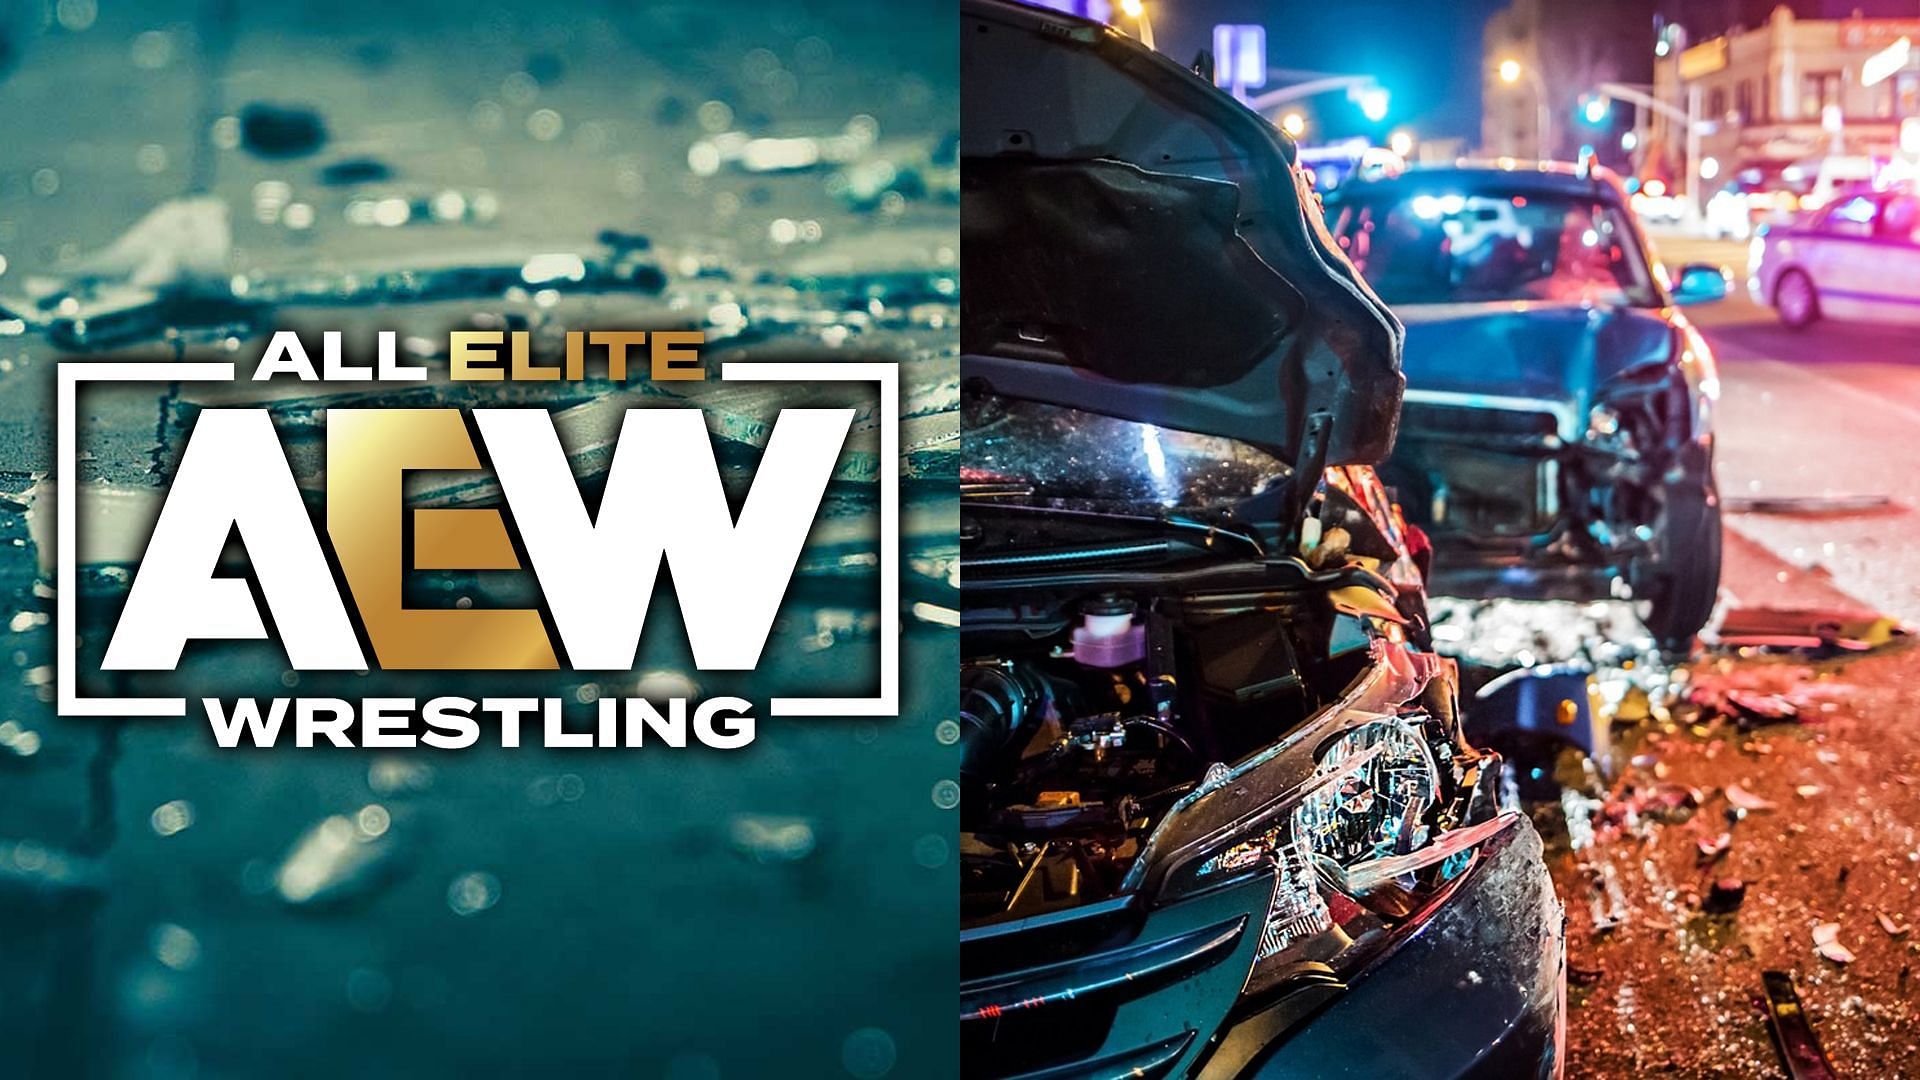 A popular AEW star was involved in a major car accident in 2019